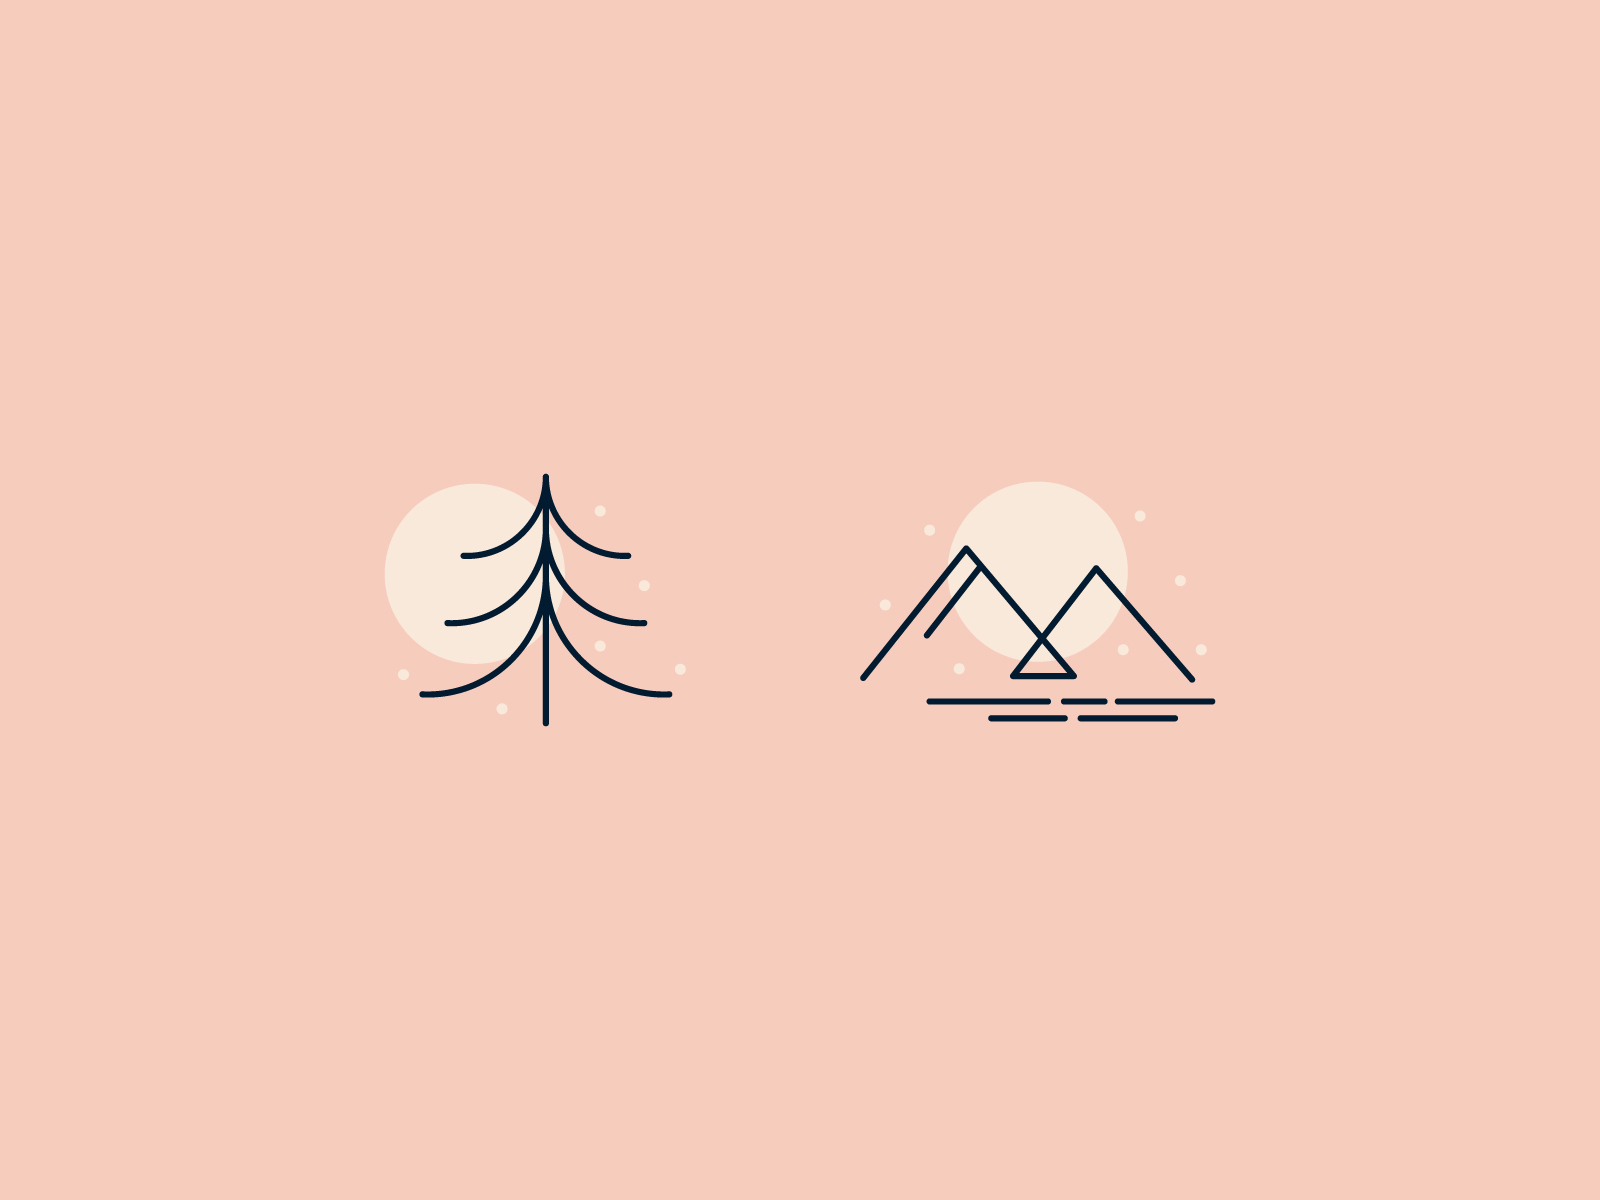 Winter Scene - Day 2 abstract day and night december icon design iconography minimalist minimalistic monoline mountain nature nature icons nature-y shapes simple tree winter icons winter scene